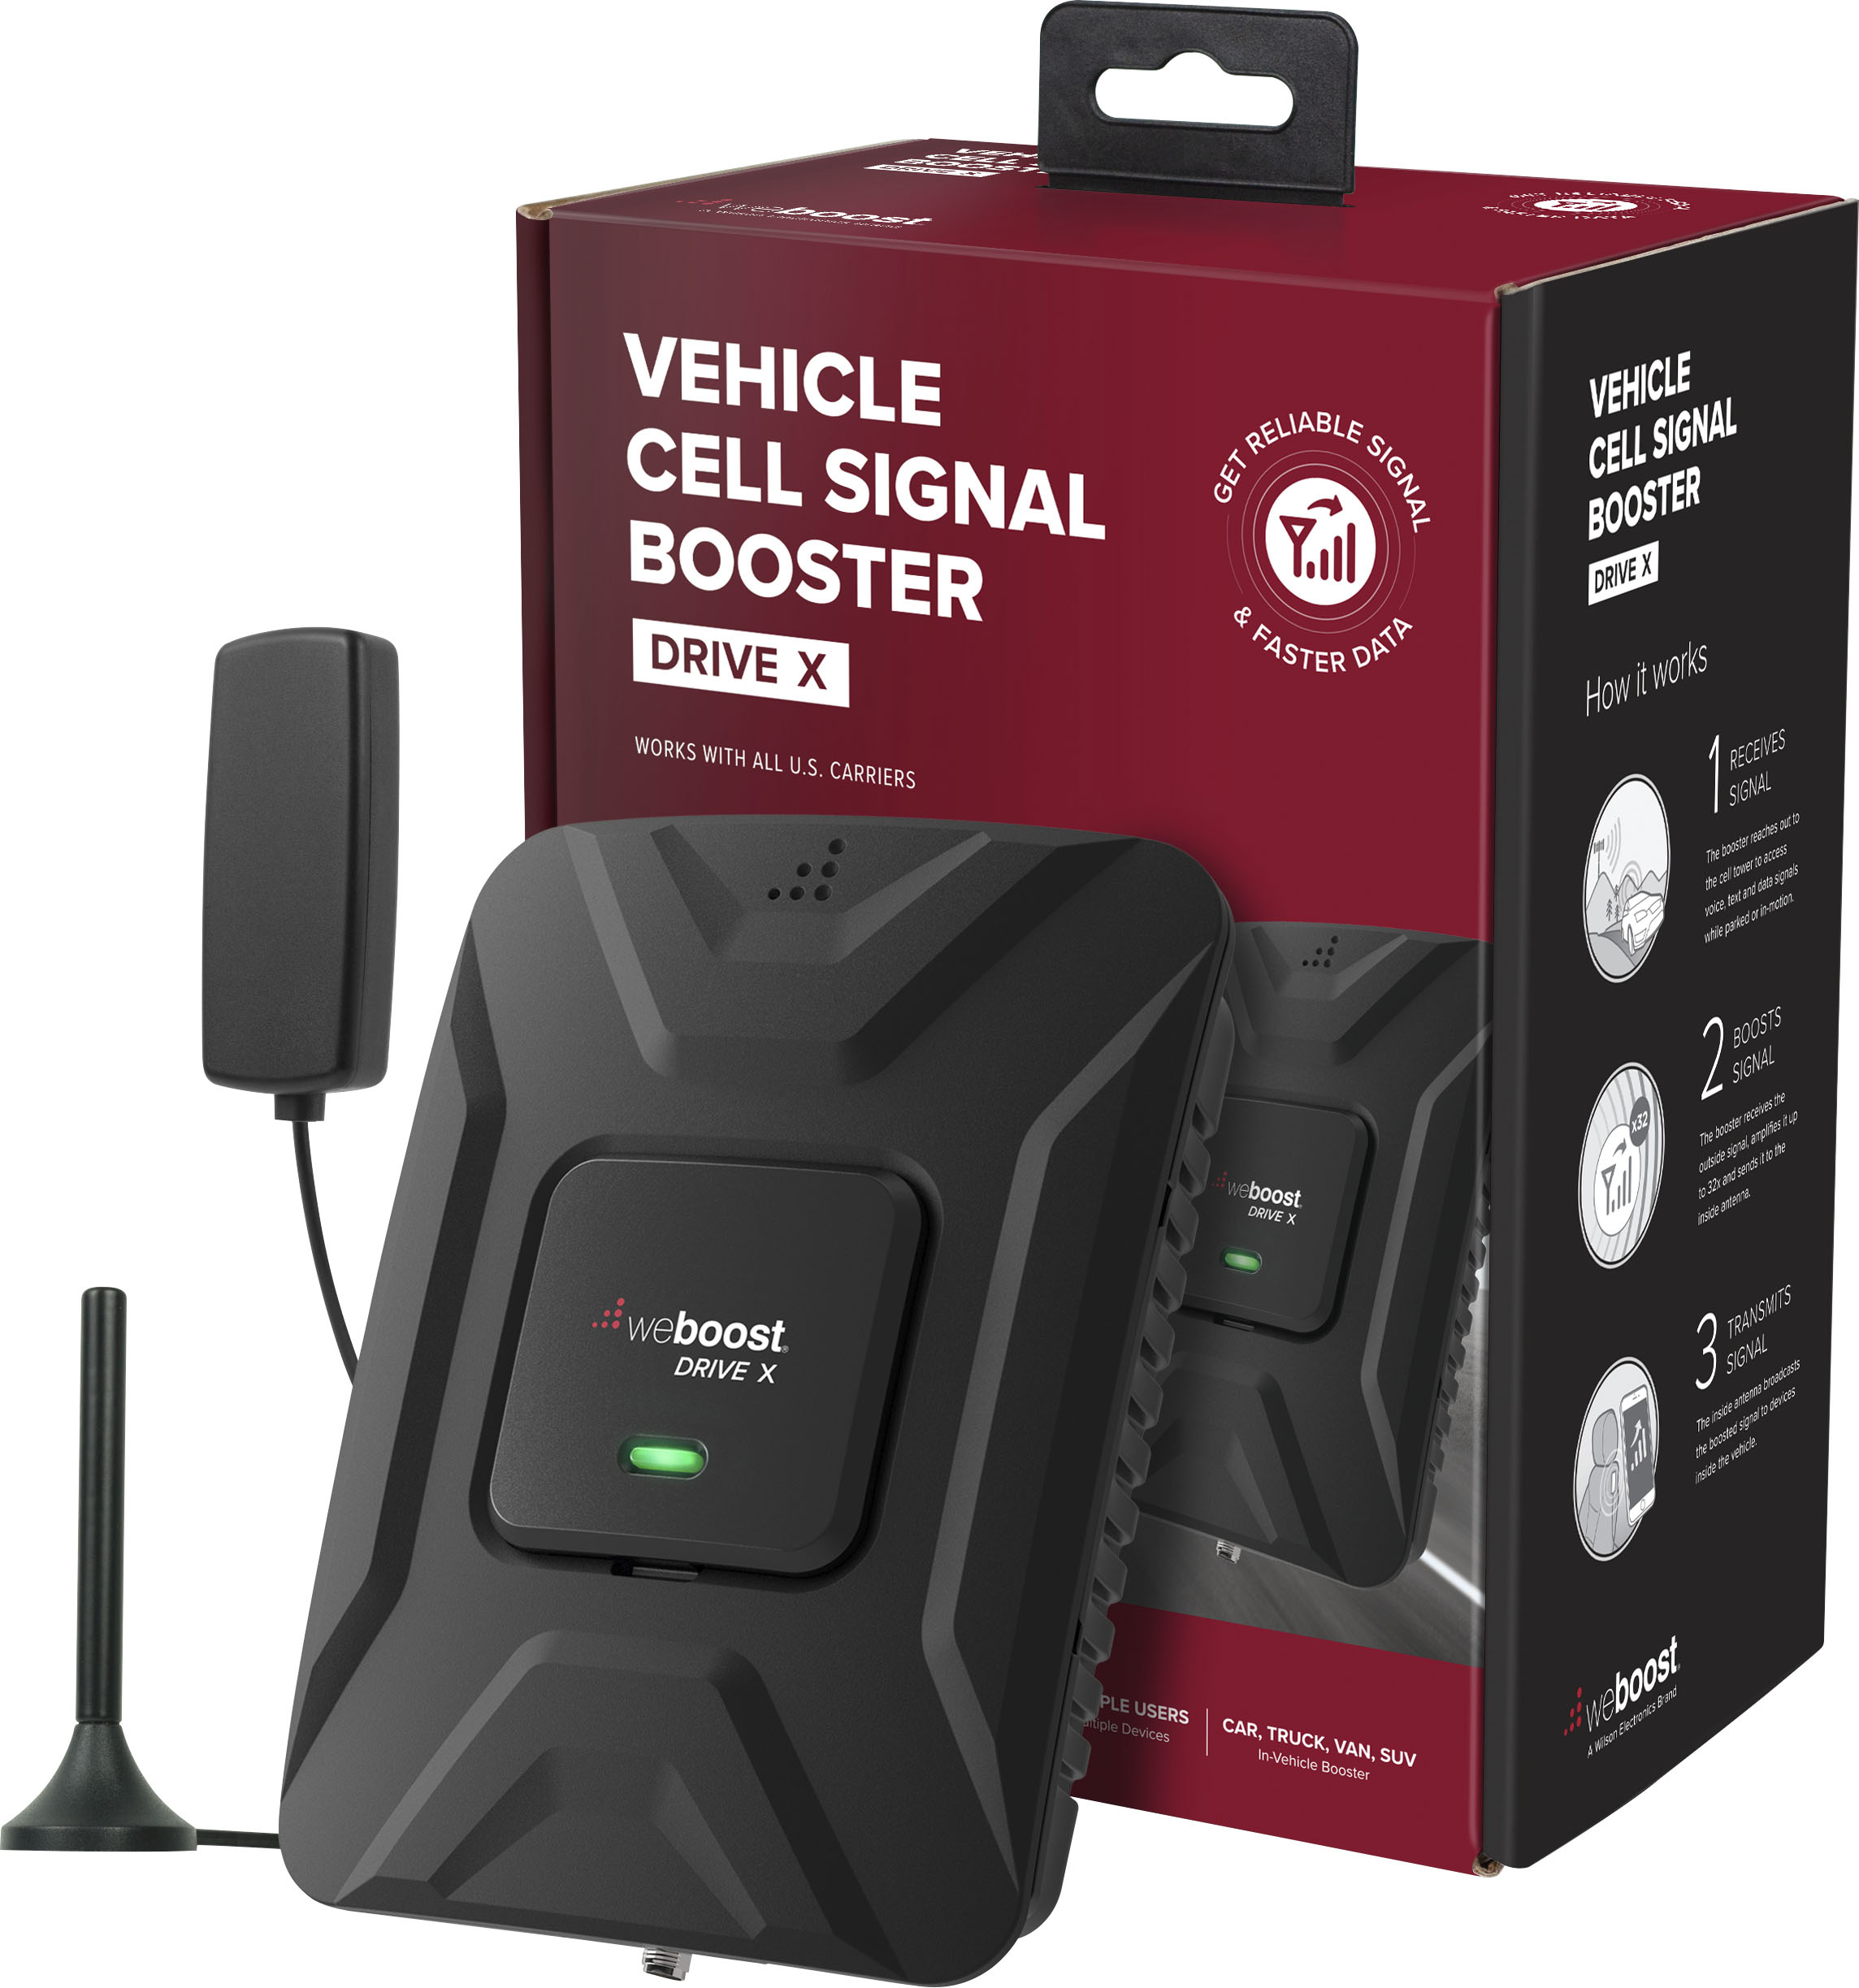 Angle View: weBoost - Drive X Vehicle Cell Phone Signal Booster for Car, Truck, Van, or SUV, Boosts 5G & 4G LTE for All U.S. Carriers